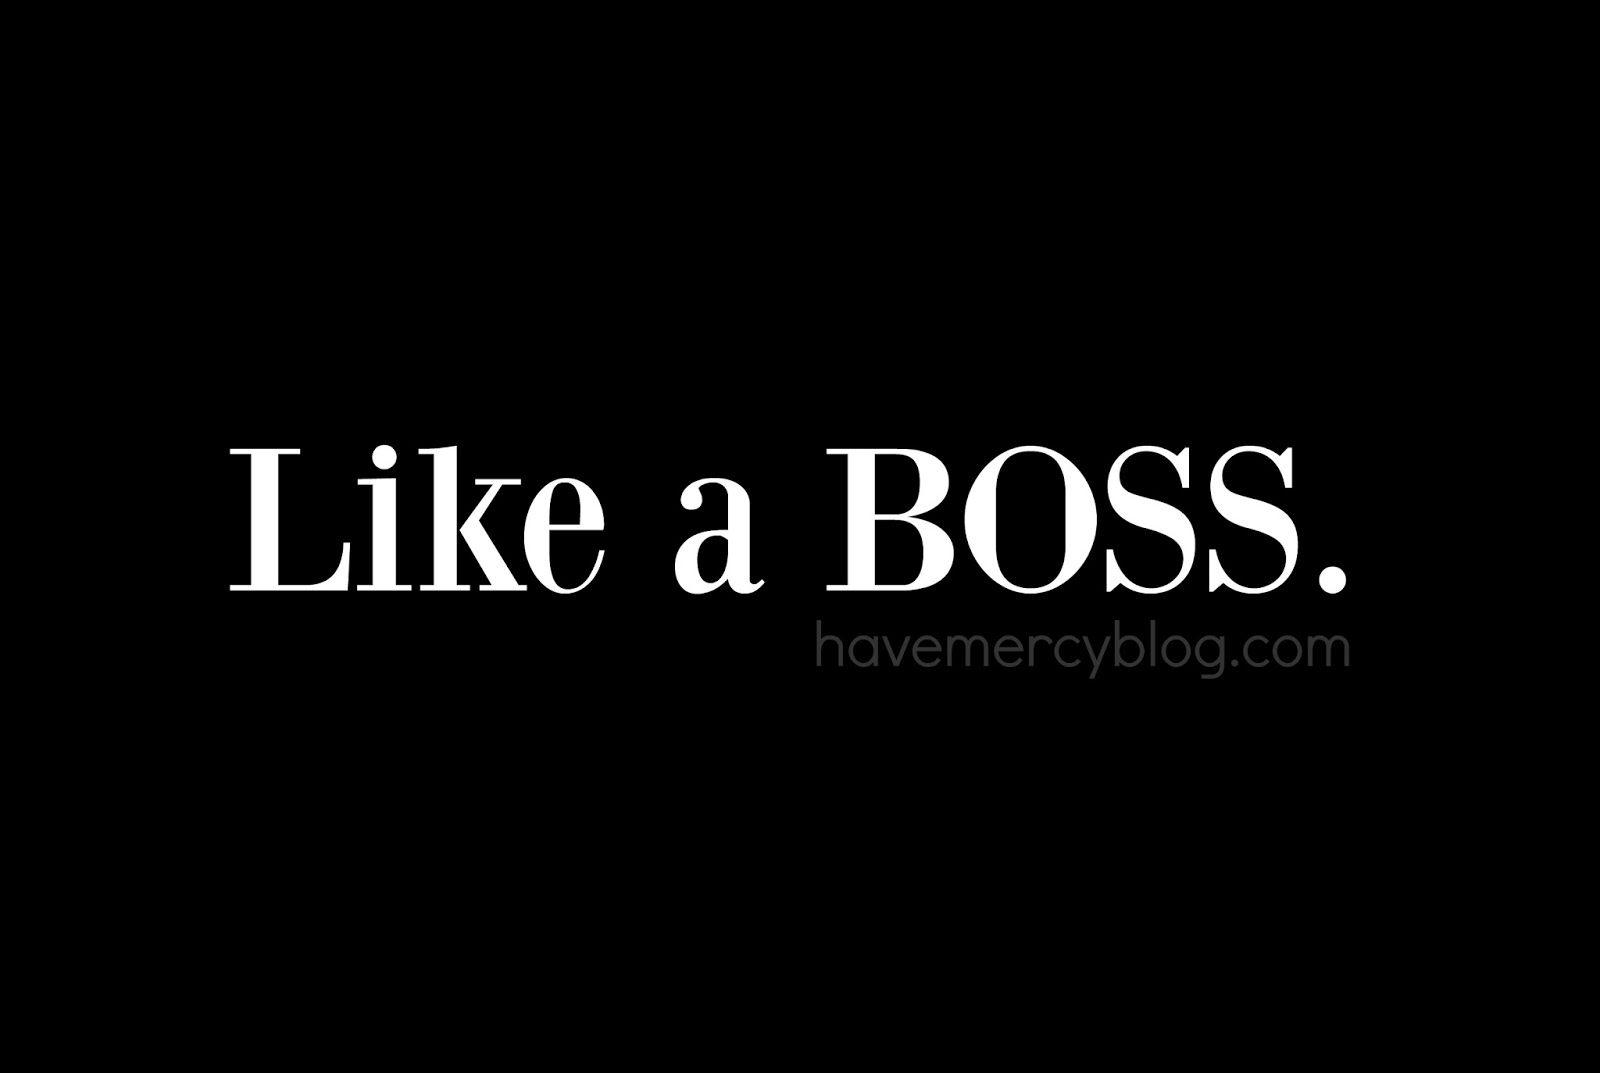 have mercy: Make Your Monday: Like a Boss